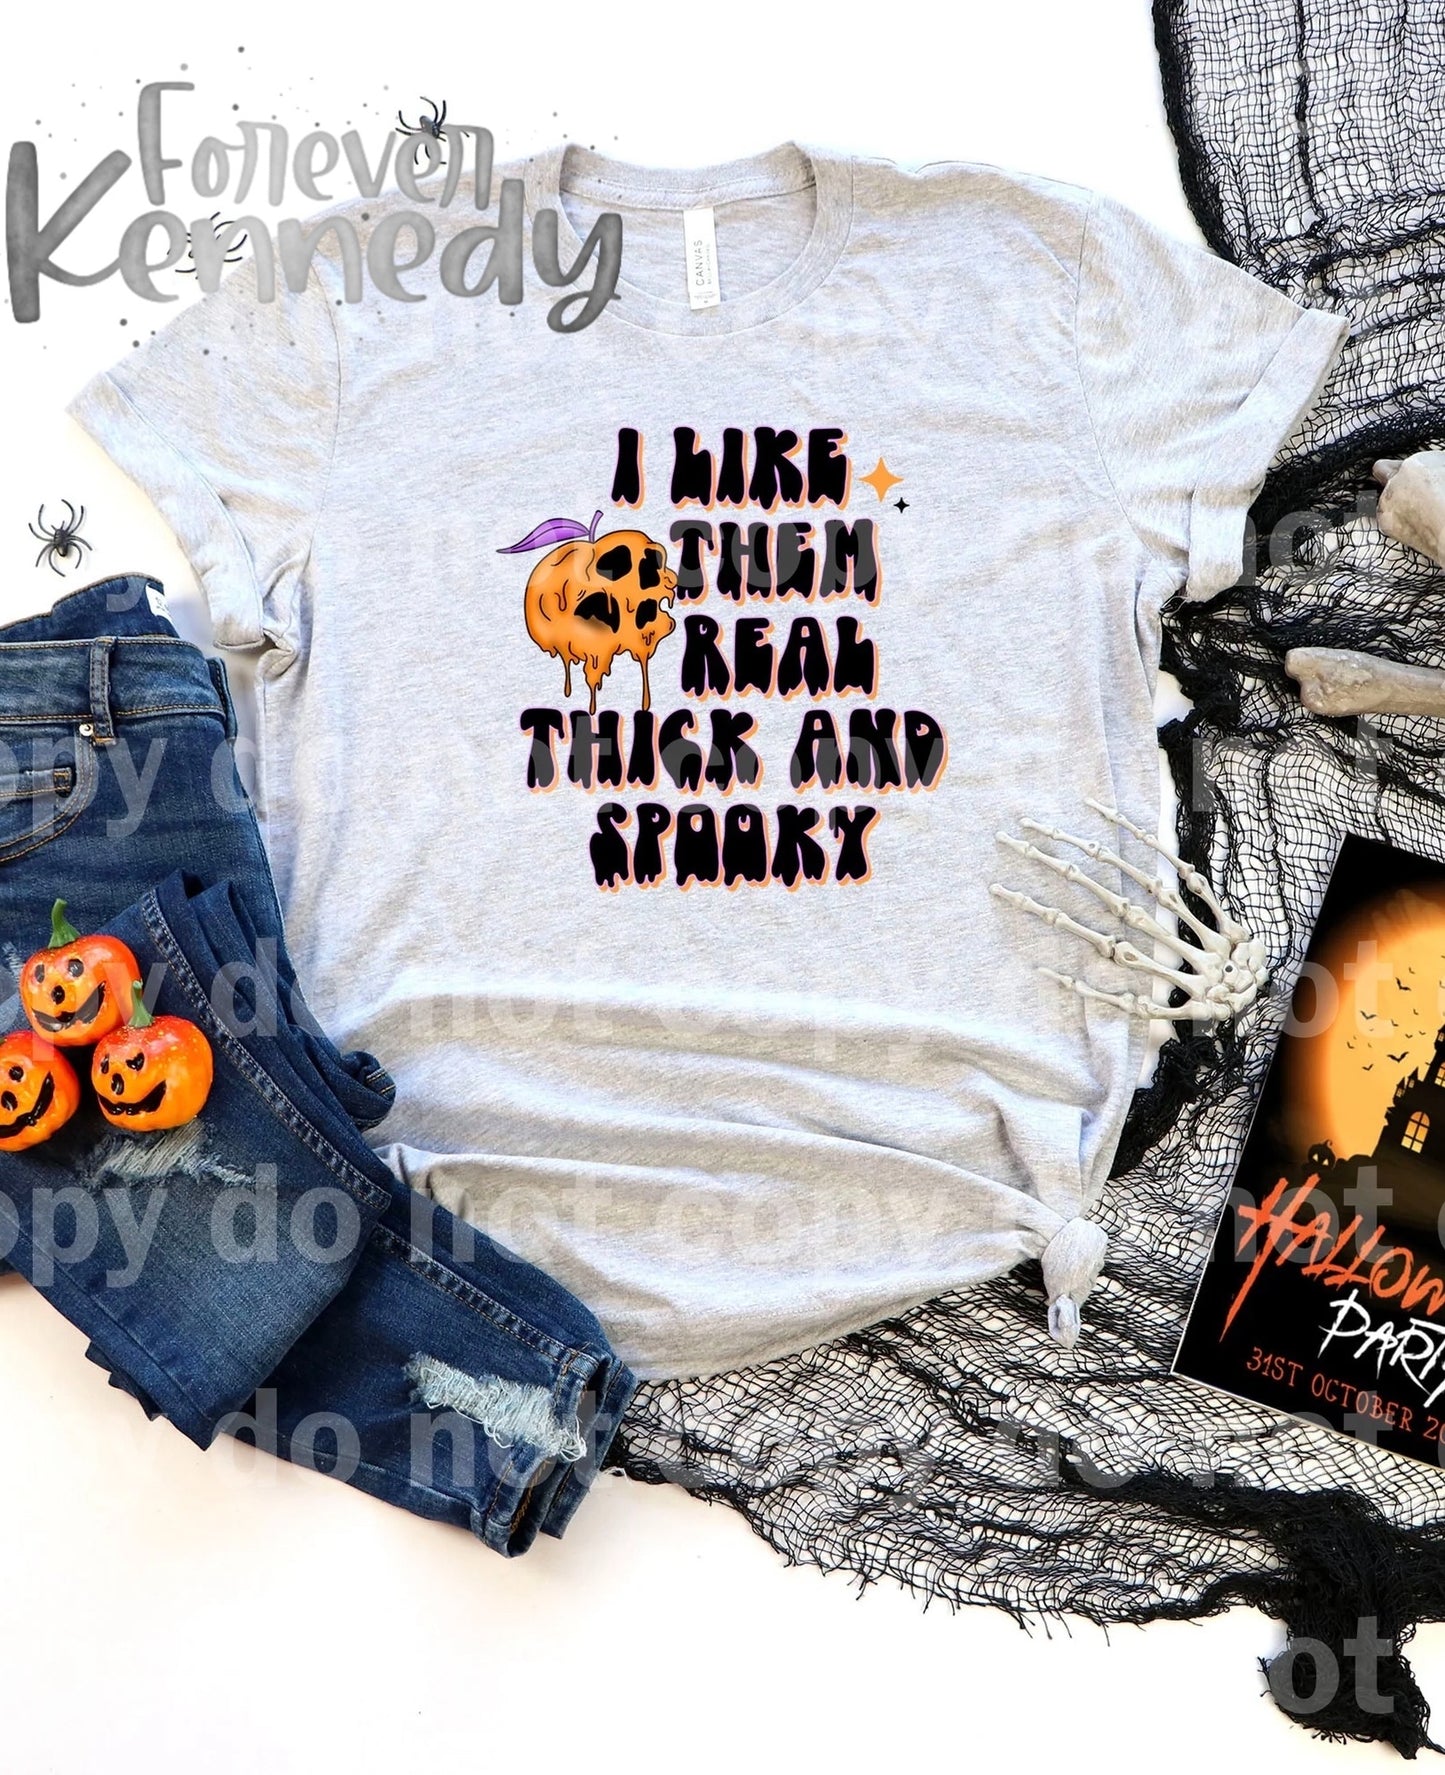 (MTO) Pick Your Apparel: Real thick and spooky